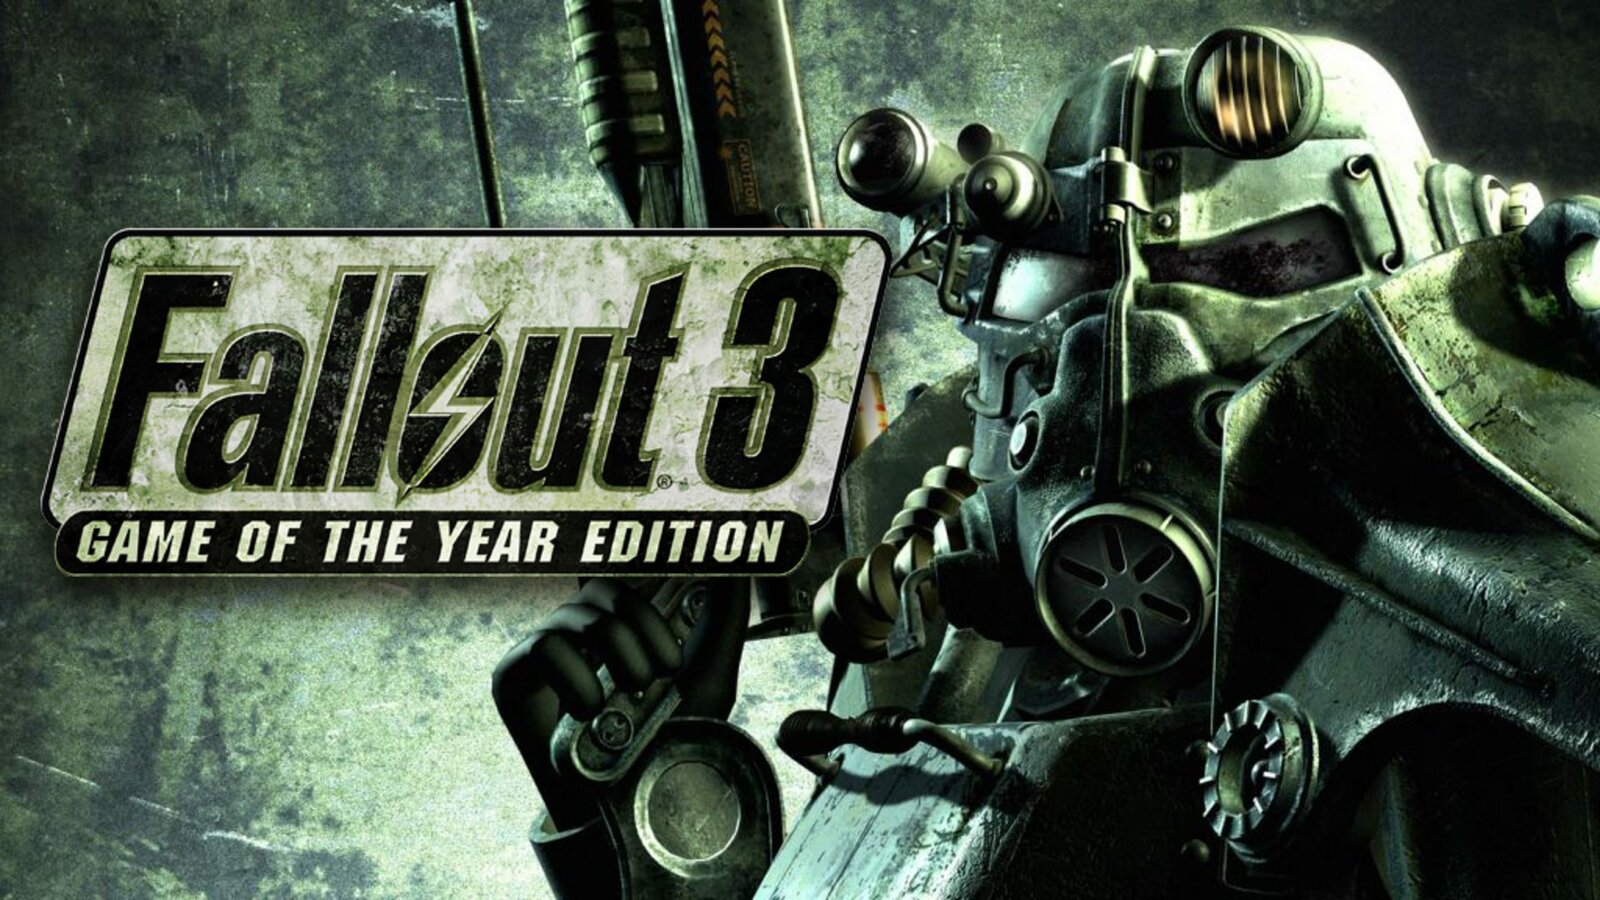 Fallout 3 - Game of the Year Edition